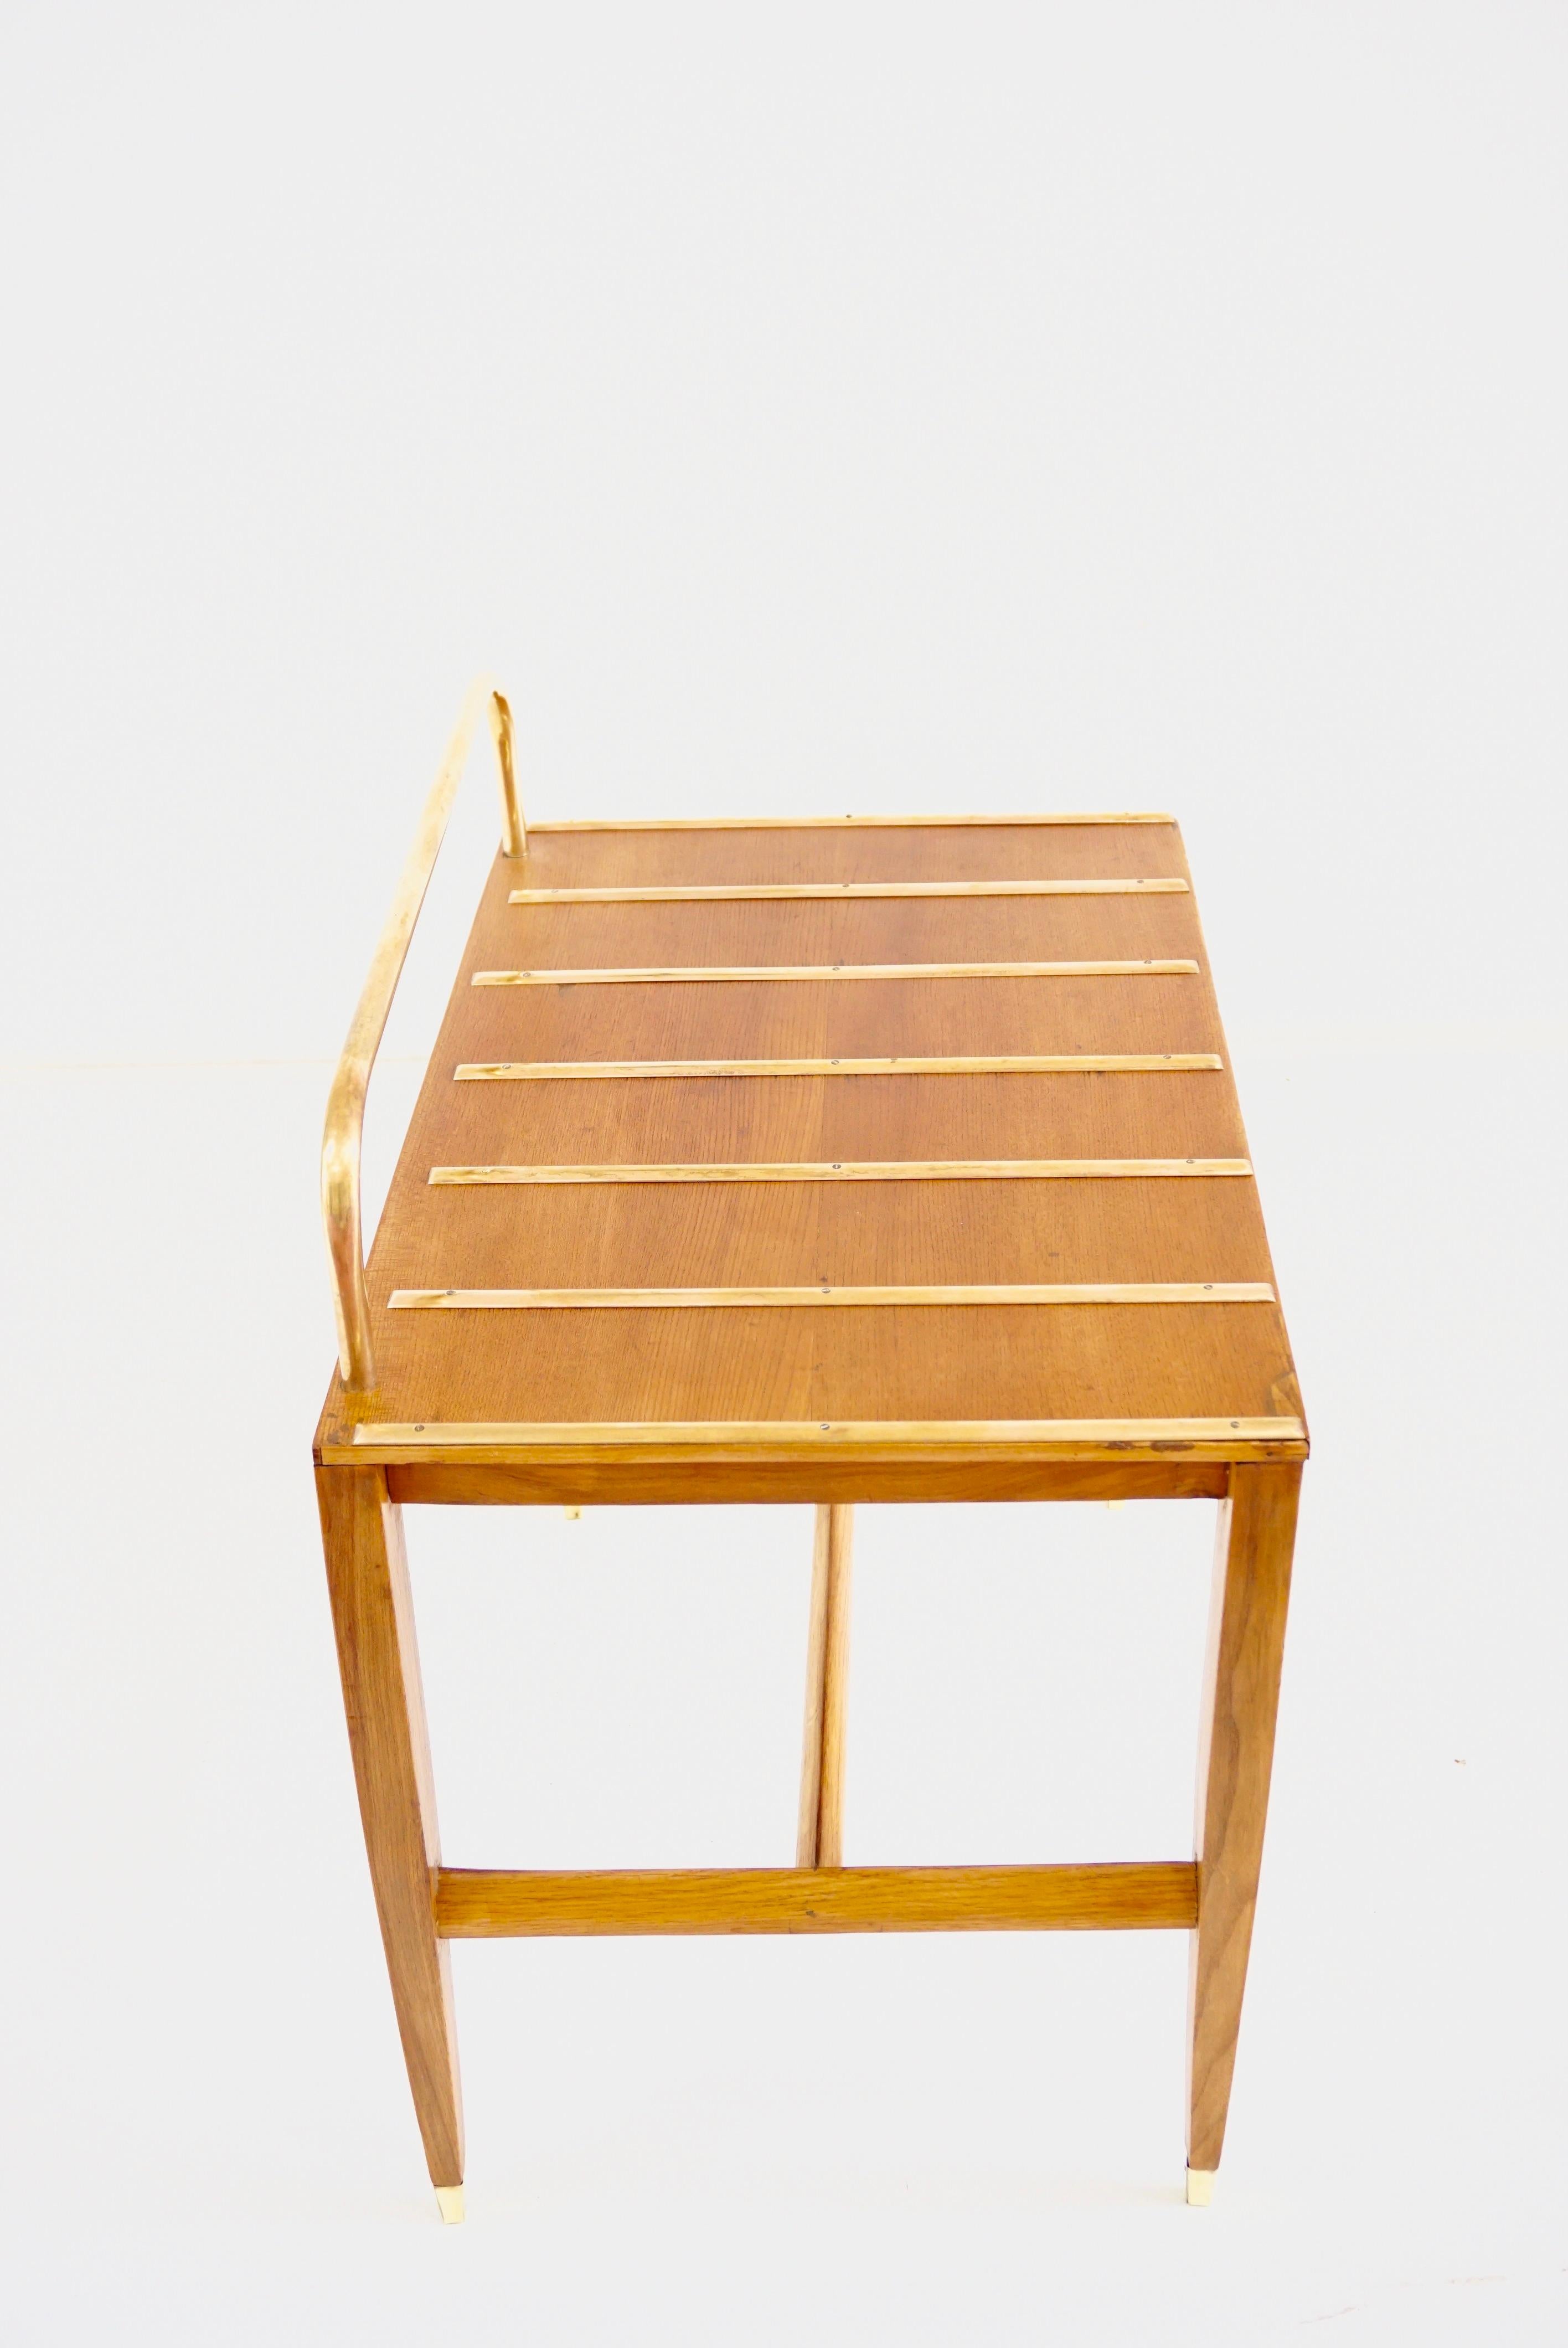 Gio Ponti Walnut Side Table, Luggage Rack for Hotel Royal Naples, 1955 For Sale 3